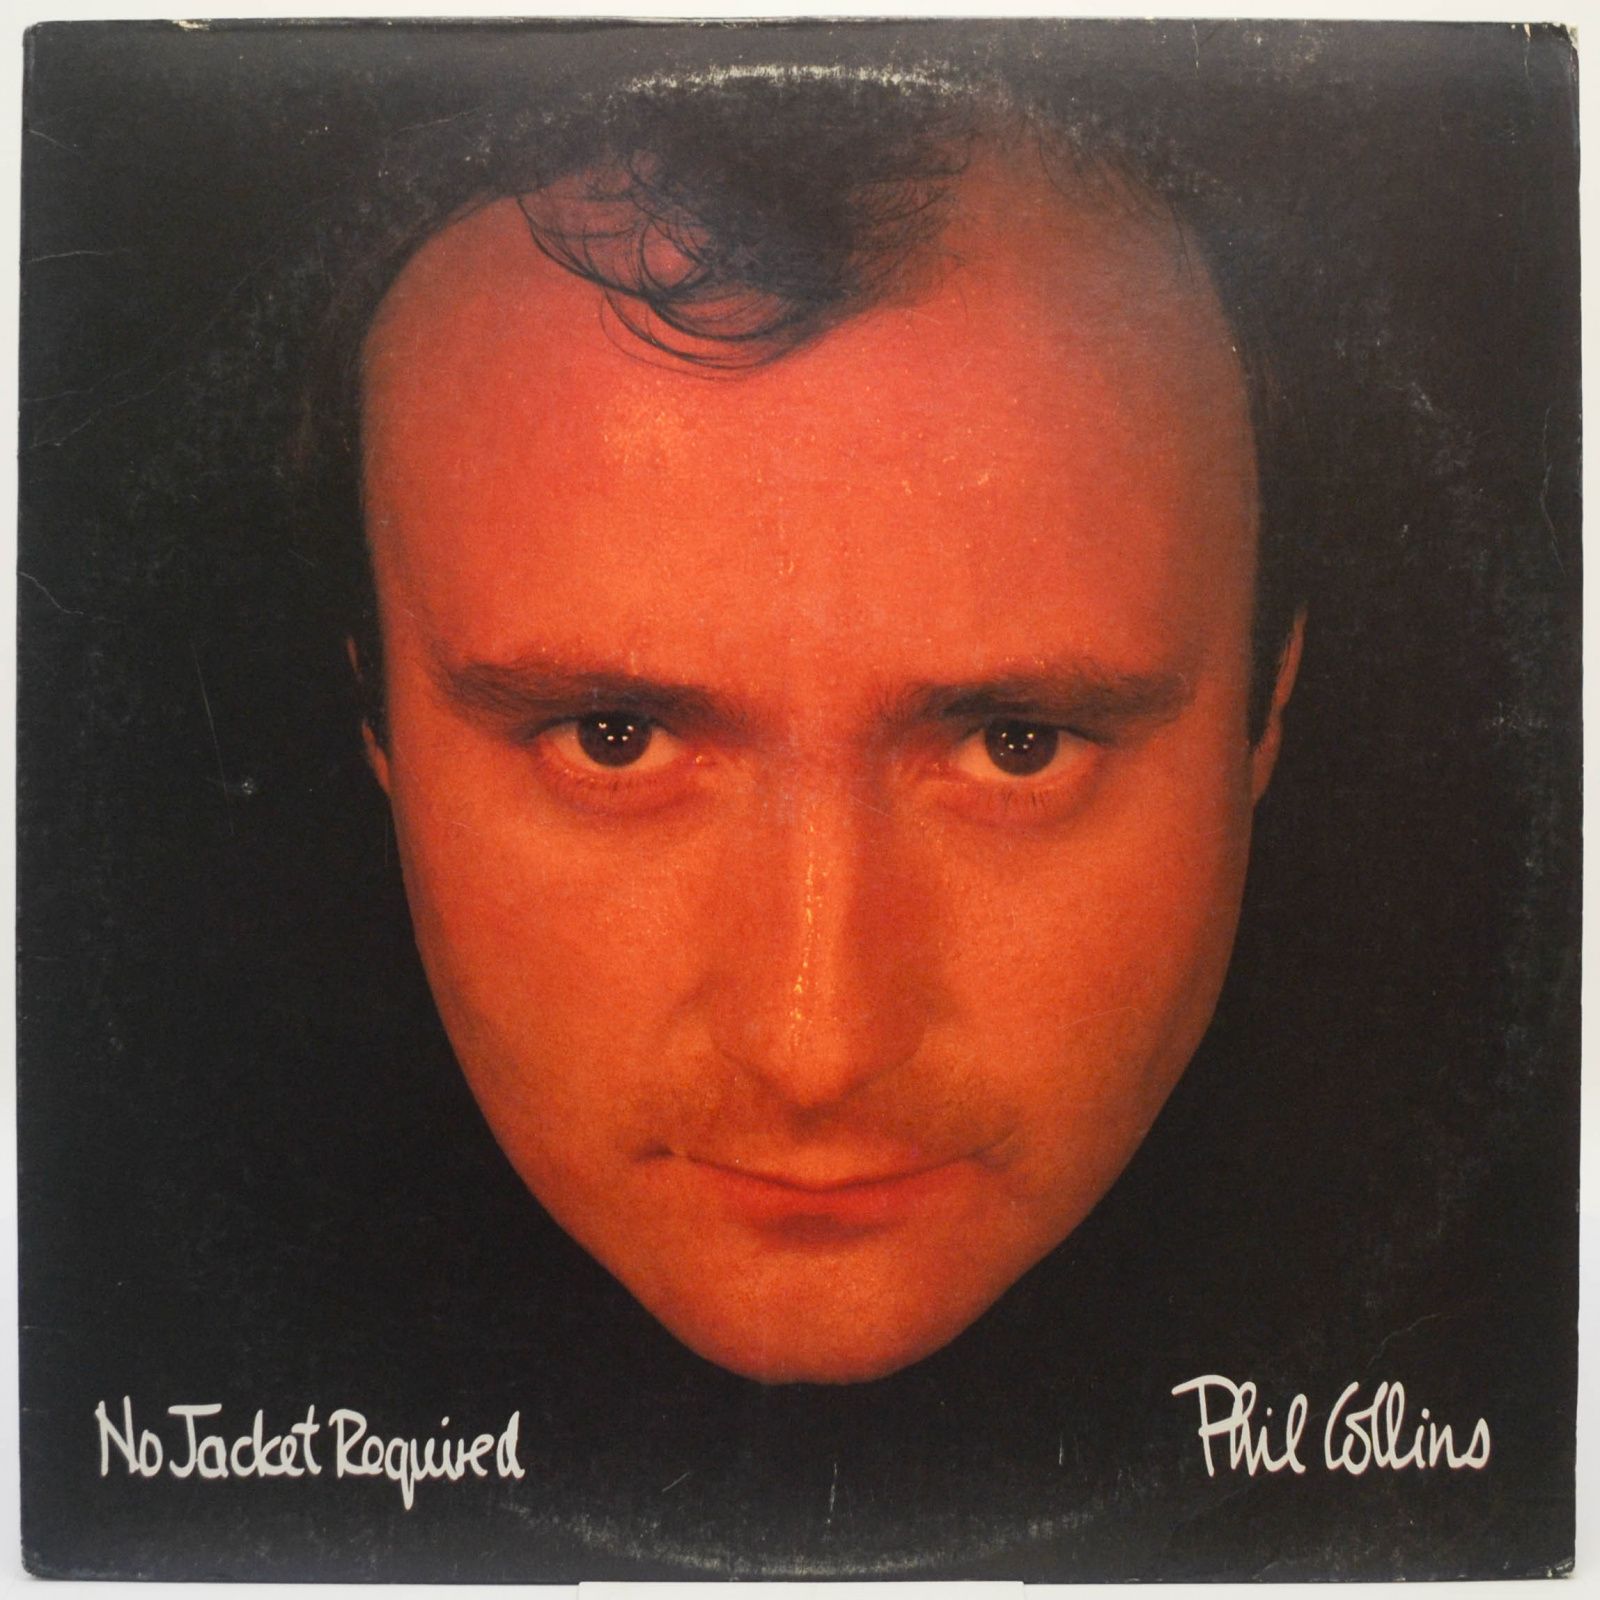 No Jacket Required (USA), 1985